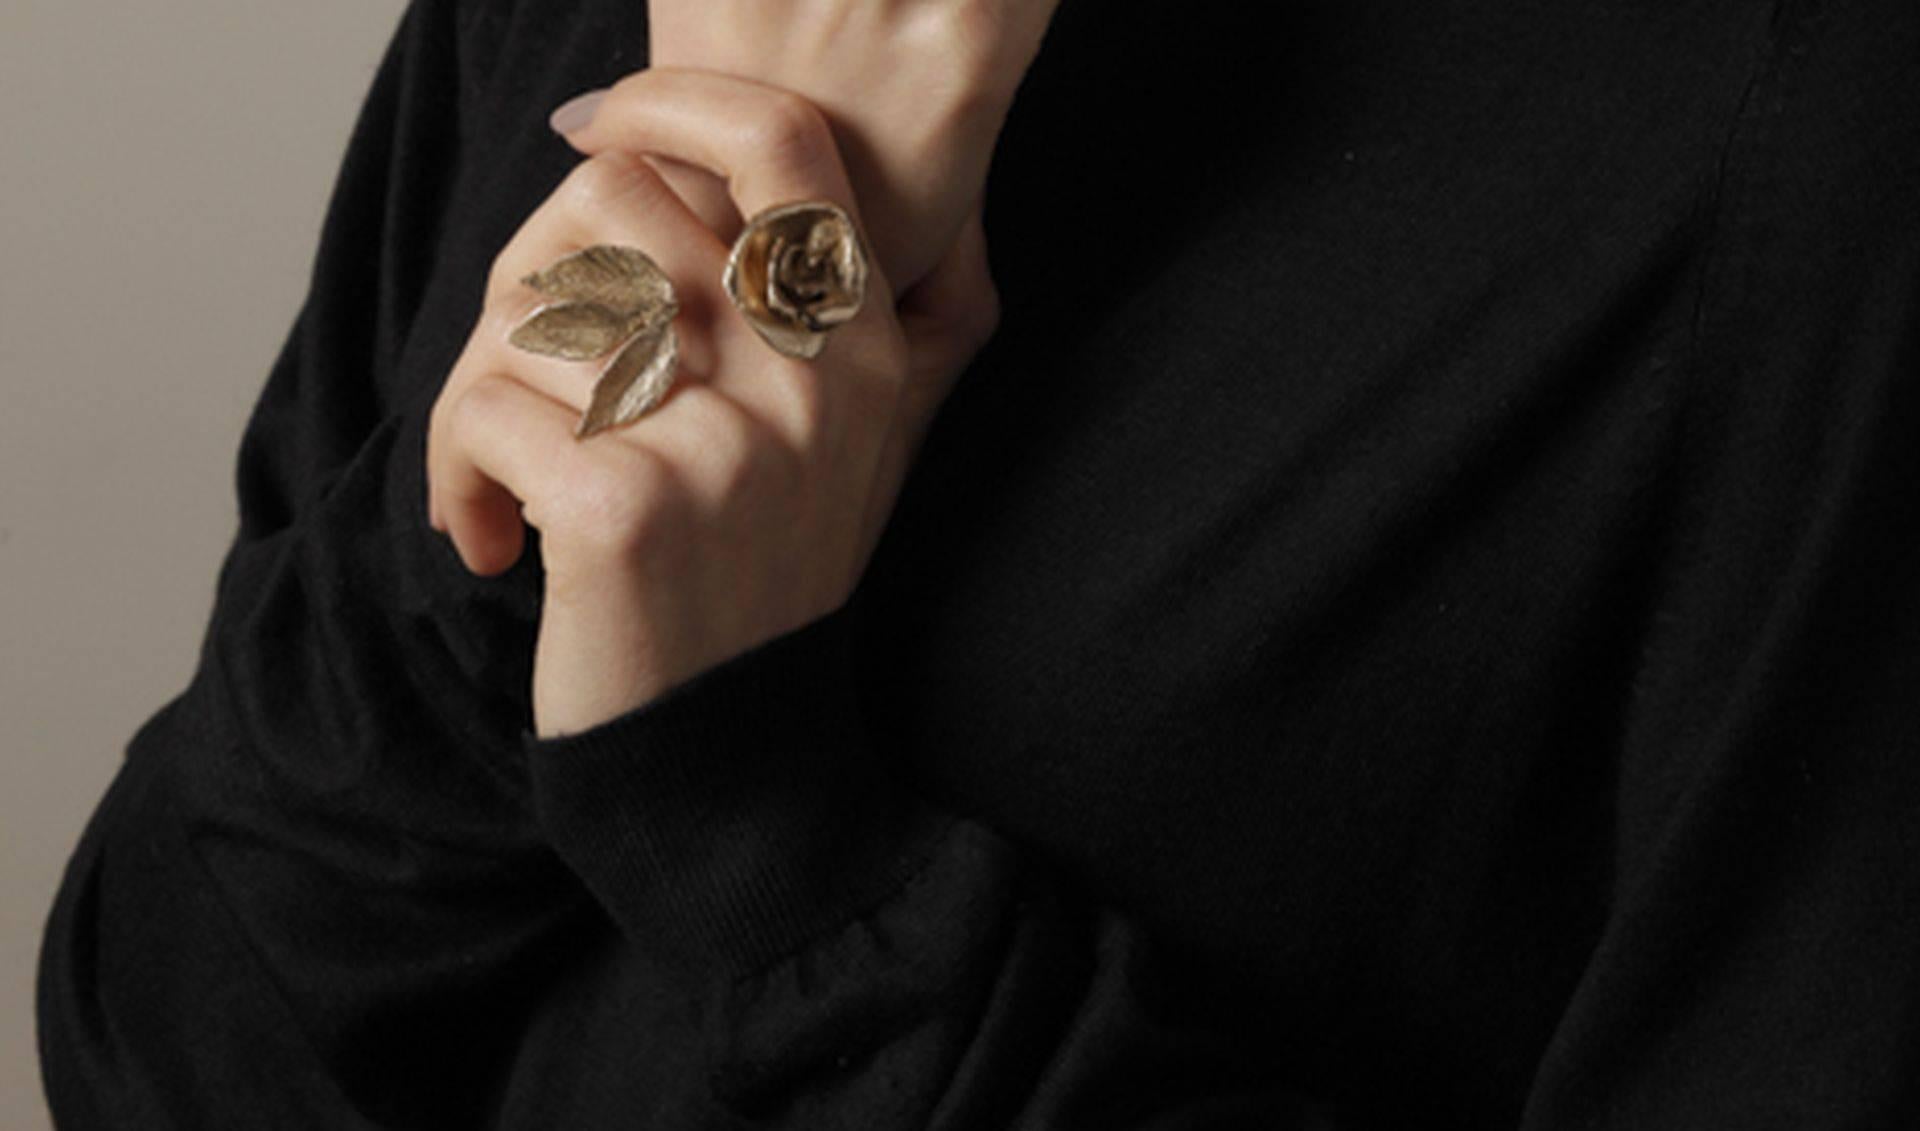 Giulia Barela's Indian Rose Gold Plated Bronze Ring is  created in Italy with a lost wax technique,  handmade.
and dipped in 24k gold plated bronze
Completely inspired by nature, in particular to light which gives vitality to material.
Giulia Barela